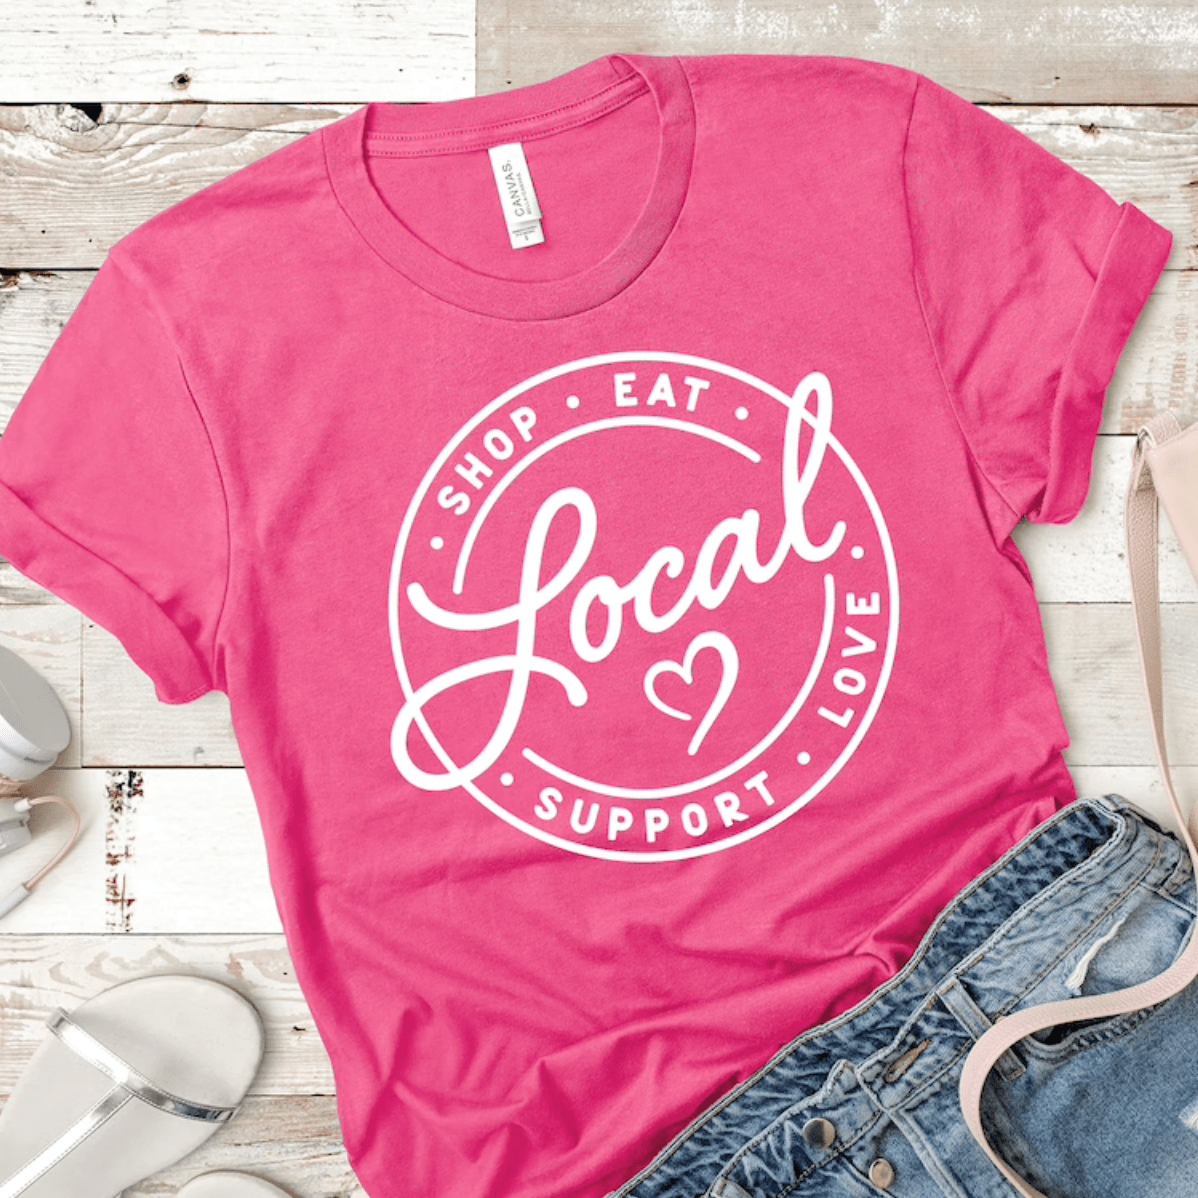 SHOP, EAT, SUPPORT, LOVE, LOCAL - Signastyle Boutique